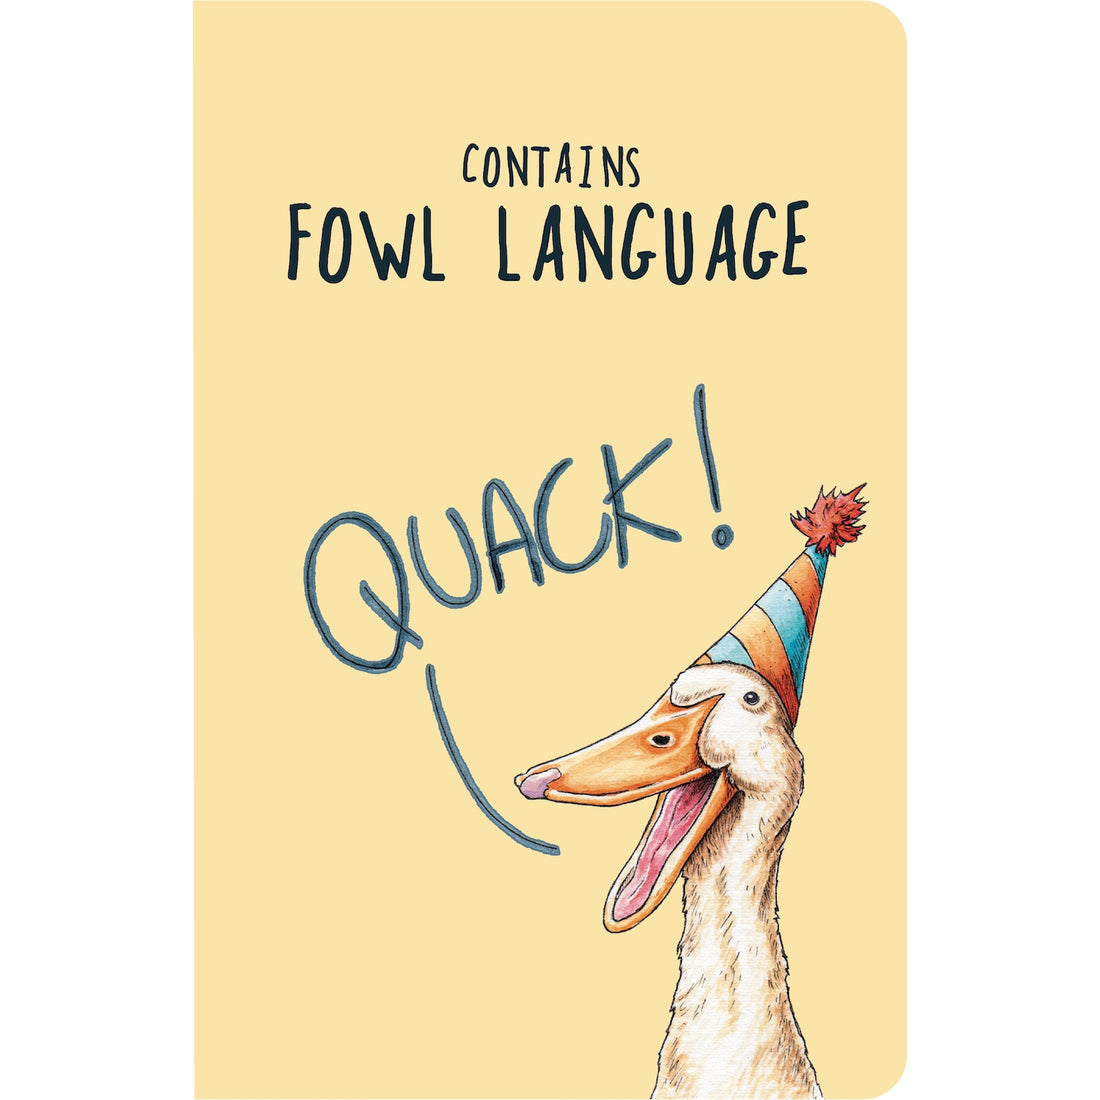 The front cover of the Fowl Language Notebook is light yellow with an illustration of a white duck in a party hat saying &quot;QUACK!&quot;, with the caption above reading &quot;Contains Fowl Language&quot;.